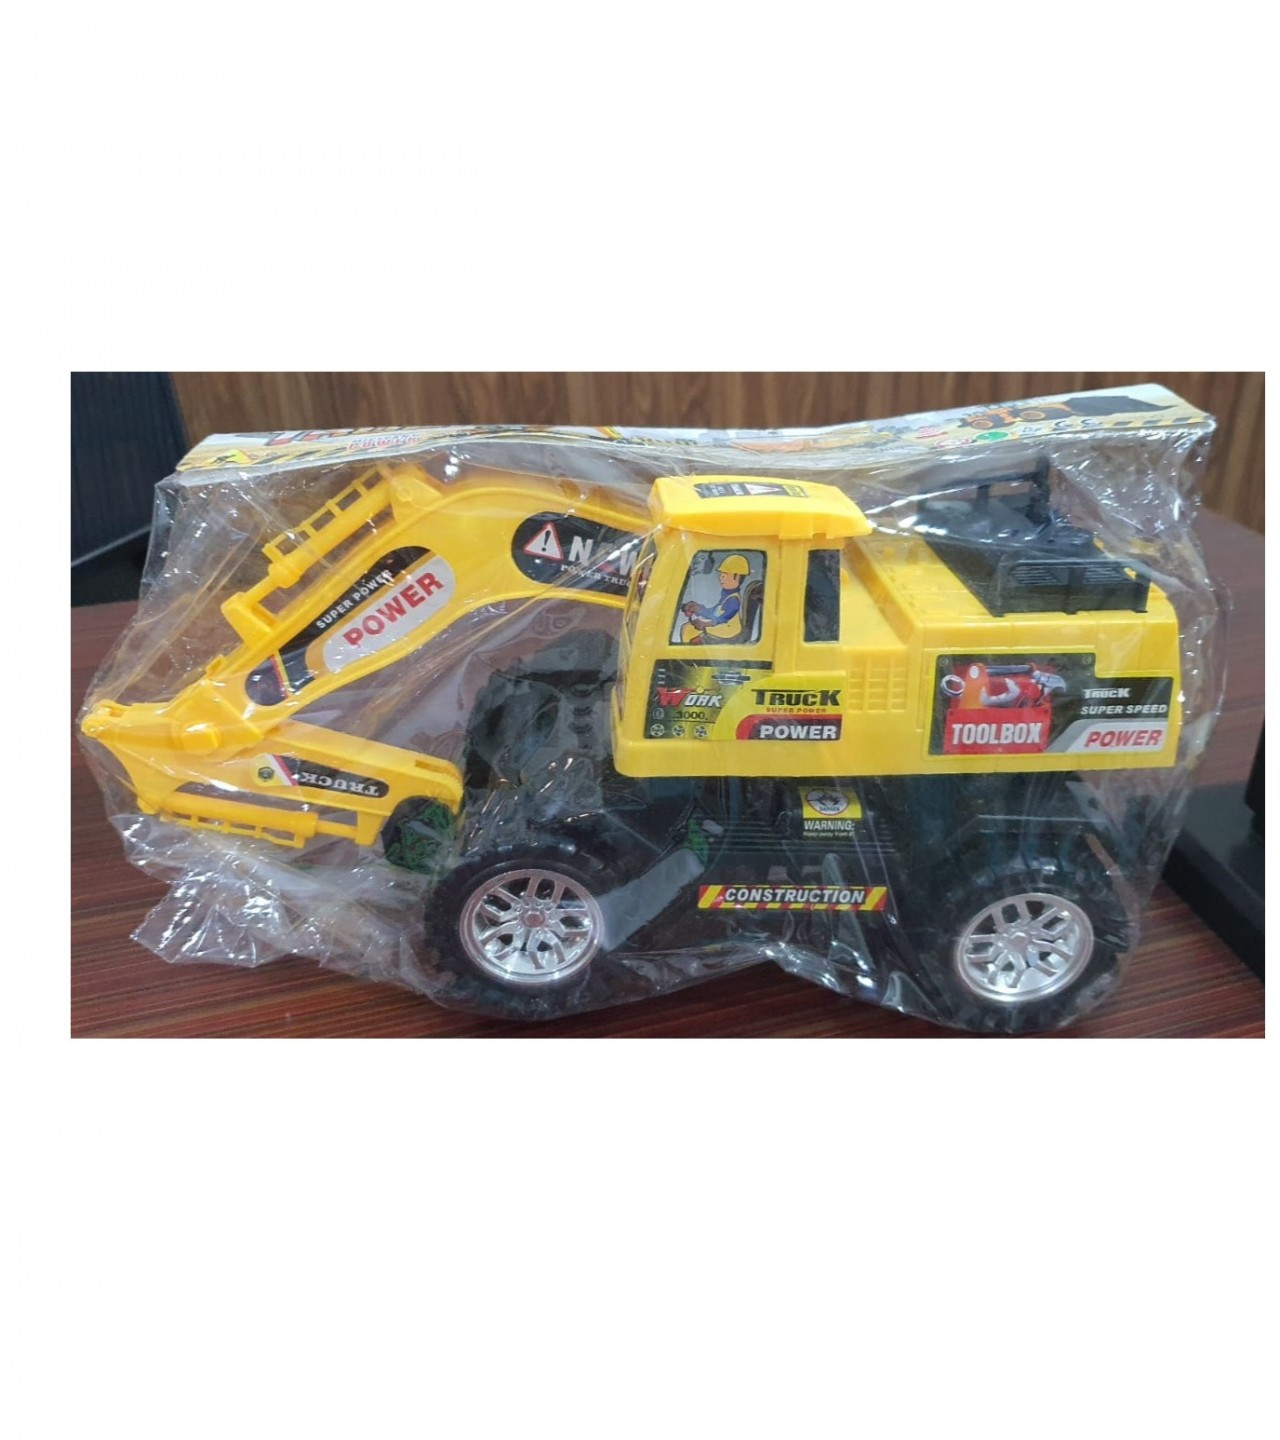 City Super Truck (New Power Truck Construction) (Yellow) 16 by 8